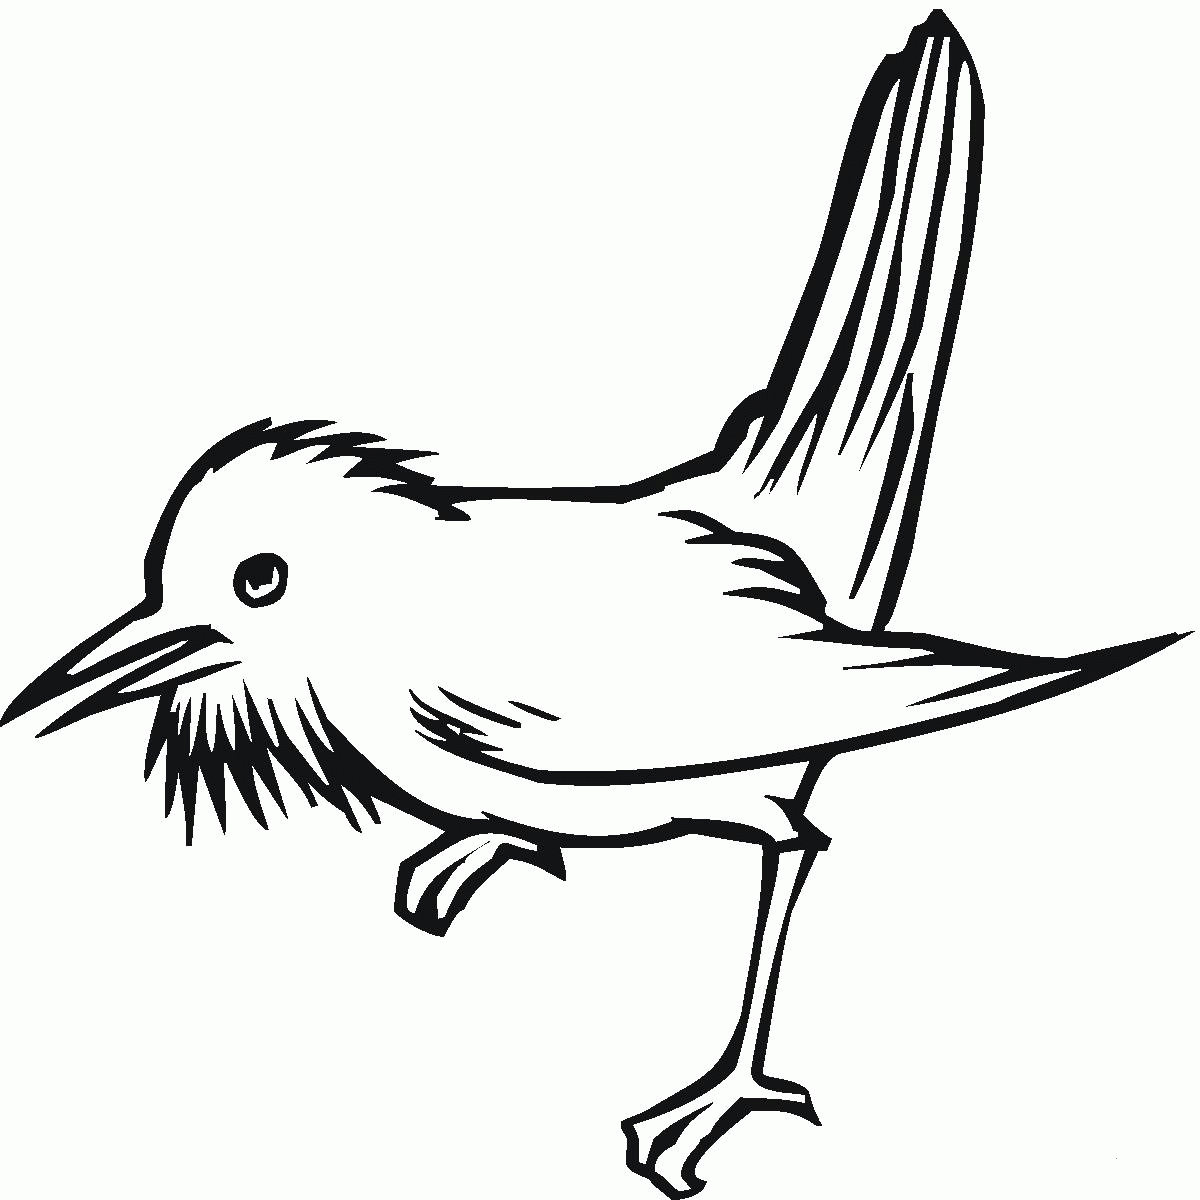 Thrush bird coloring page - ColouringPages